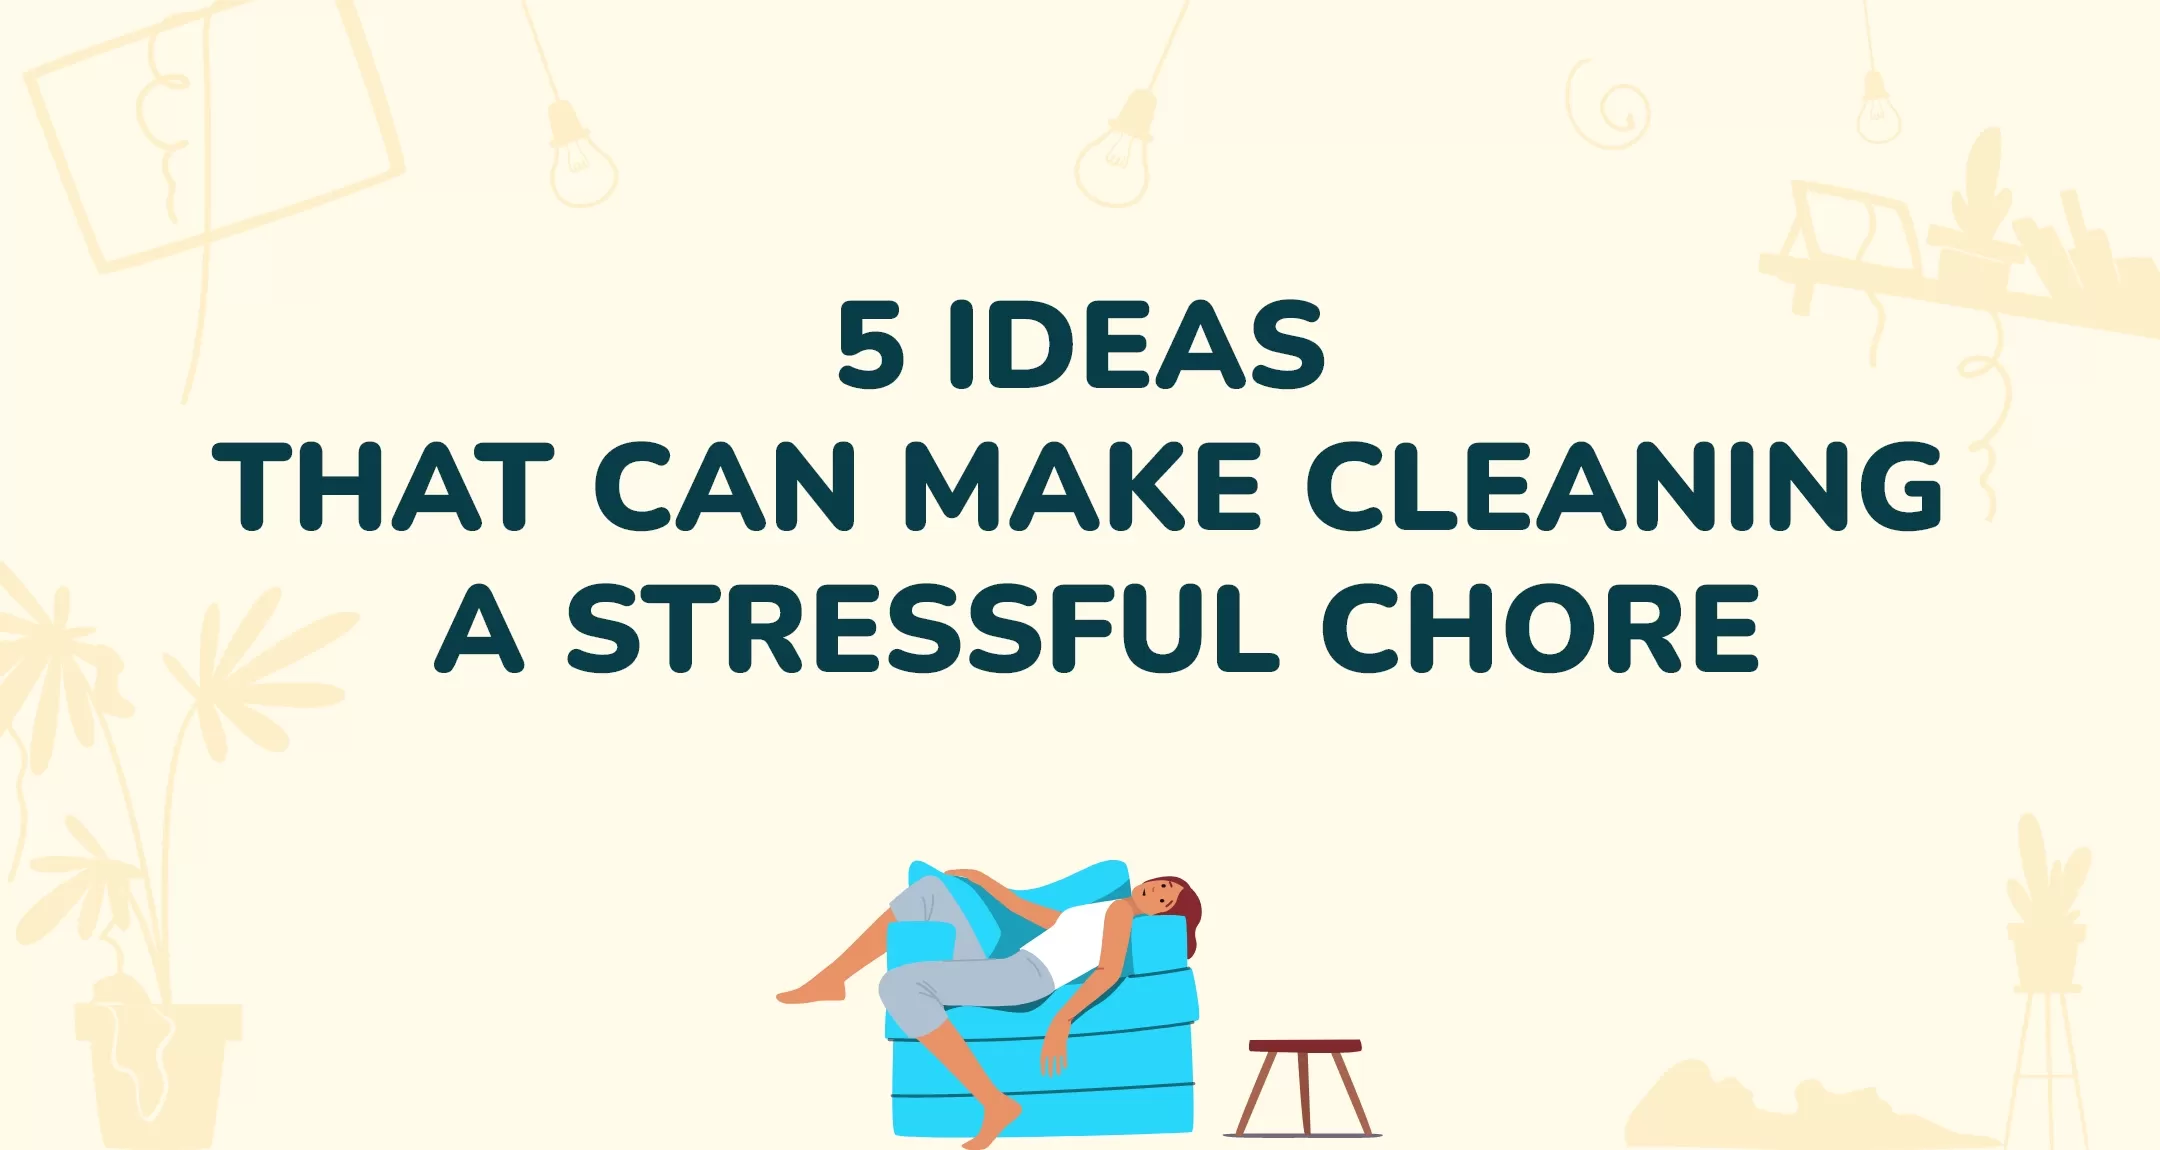 5 Ideas That Can Make Cleaning A Stressful Chore